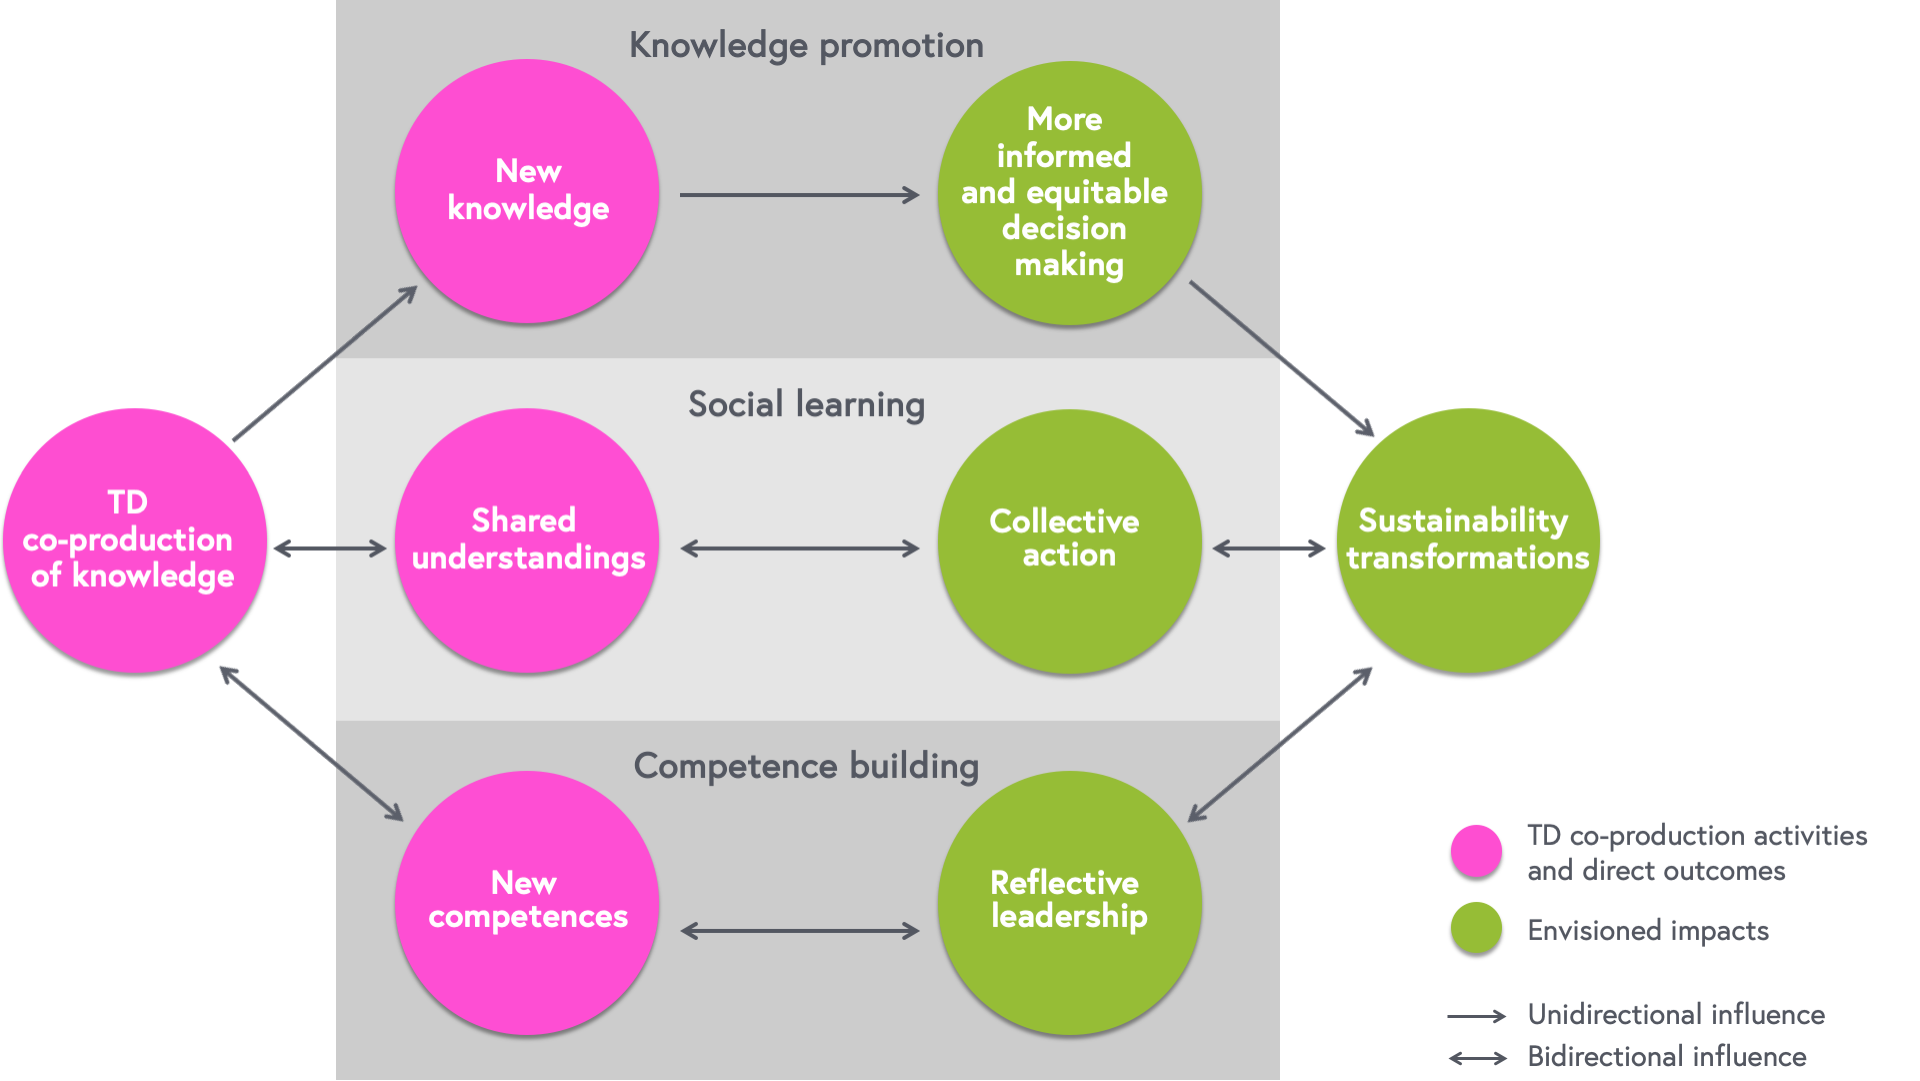 Scheme depicting the generic mechanisms for impact generation, which involves knowledge promotion, social learning, and competence building.